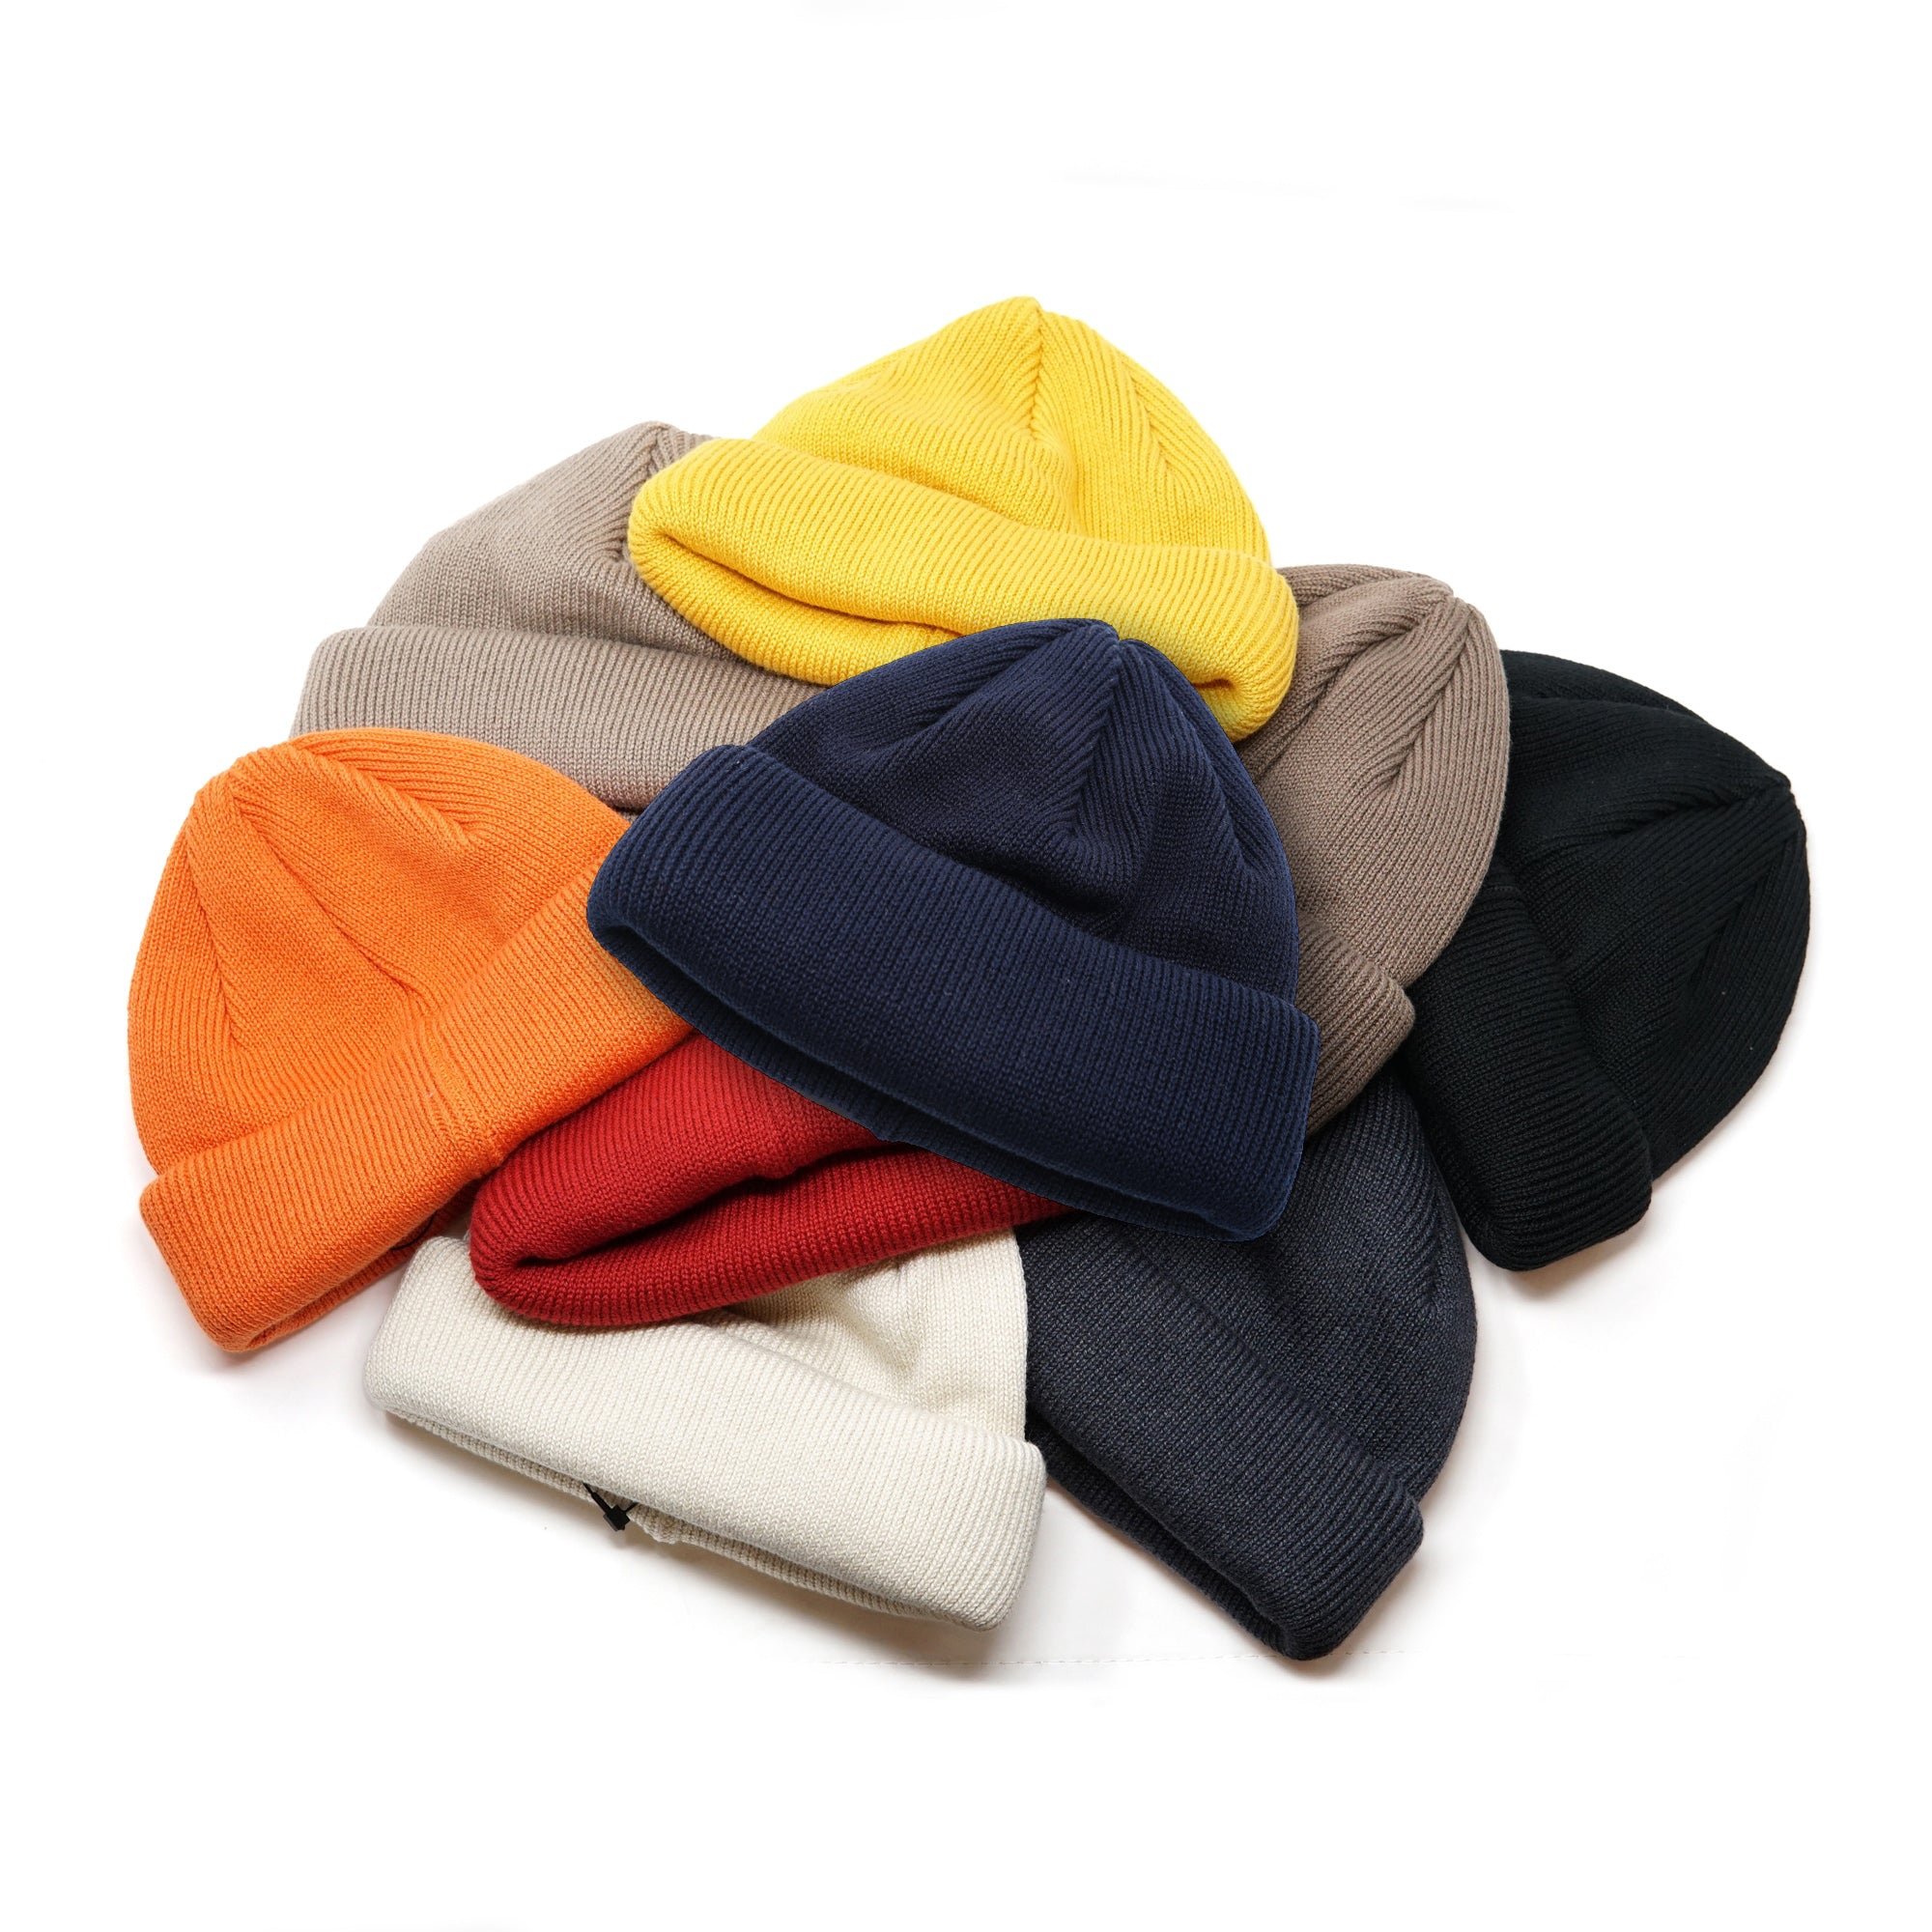 No:RL-18-935 | Name:Roll Knit Cap | Color:Green/Beige/Brown/Ivory/Red/Charcoal/Mustard/Orange/Black【RACAL_ラカル】